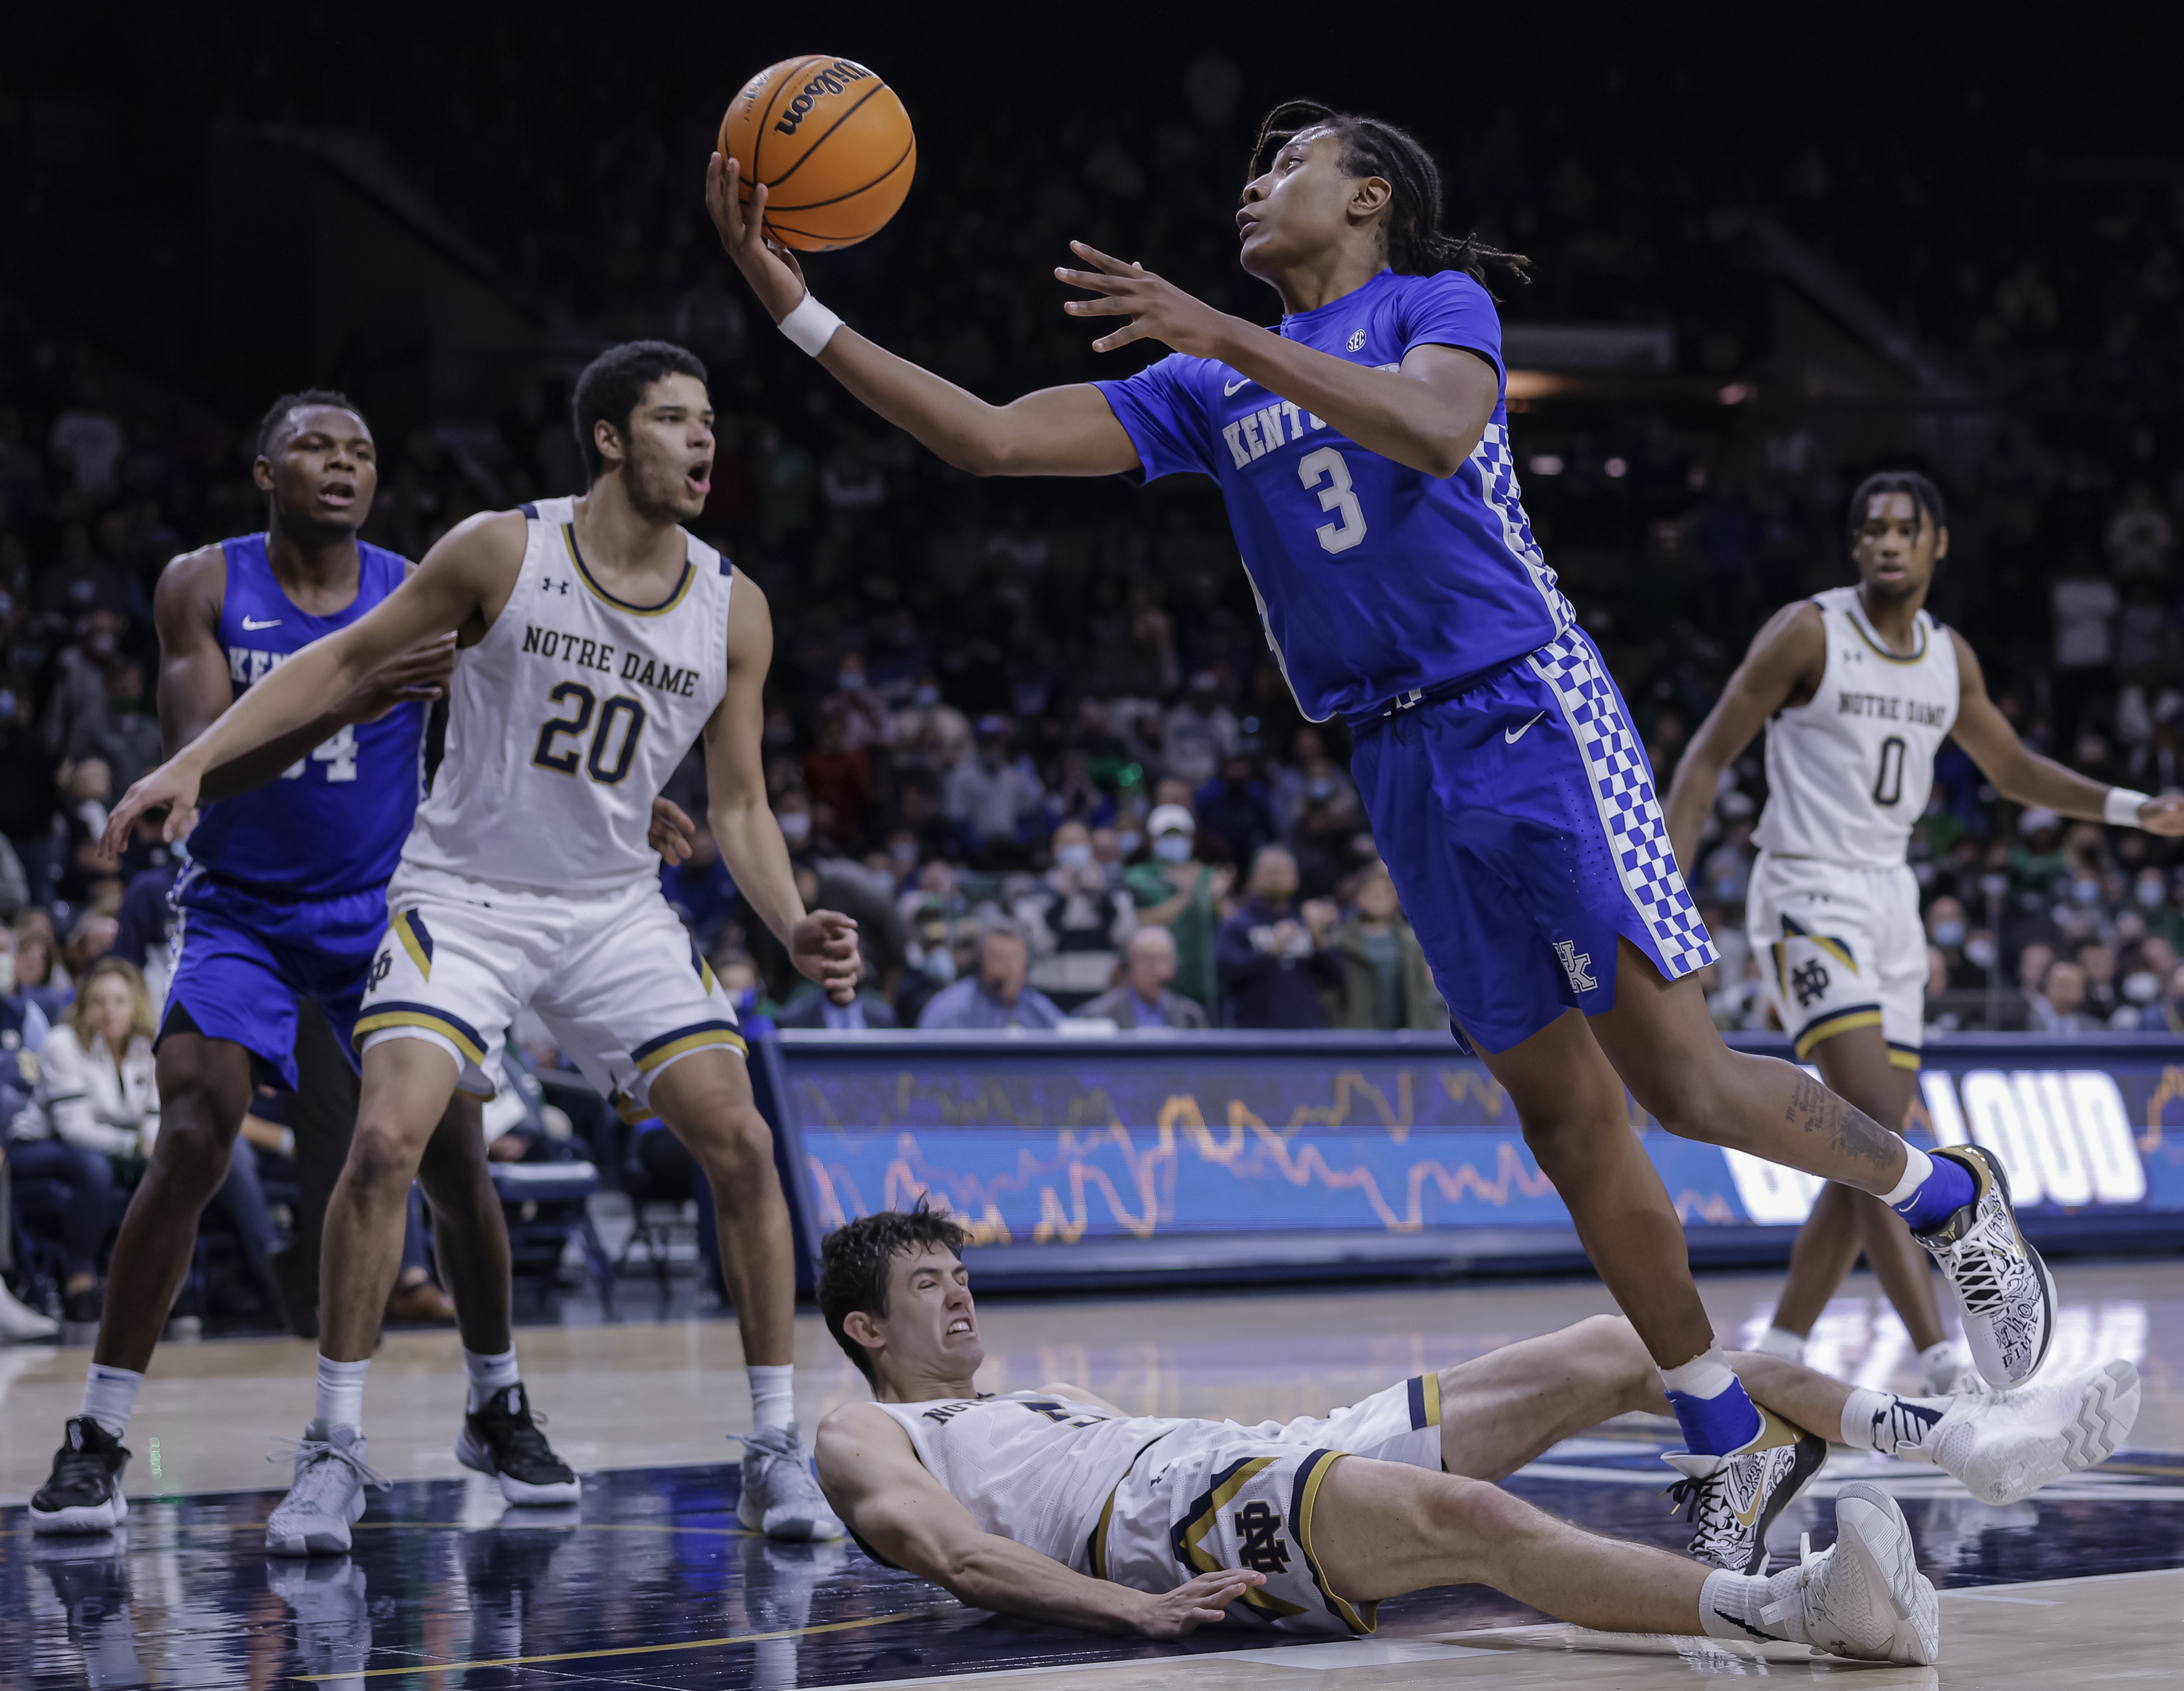 Kentucky Basketball Game Today Kentucky vs North Carolina, Line, Predictions, Odds, TV Channel and Live Stream for Basketball Game Dec